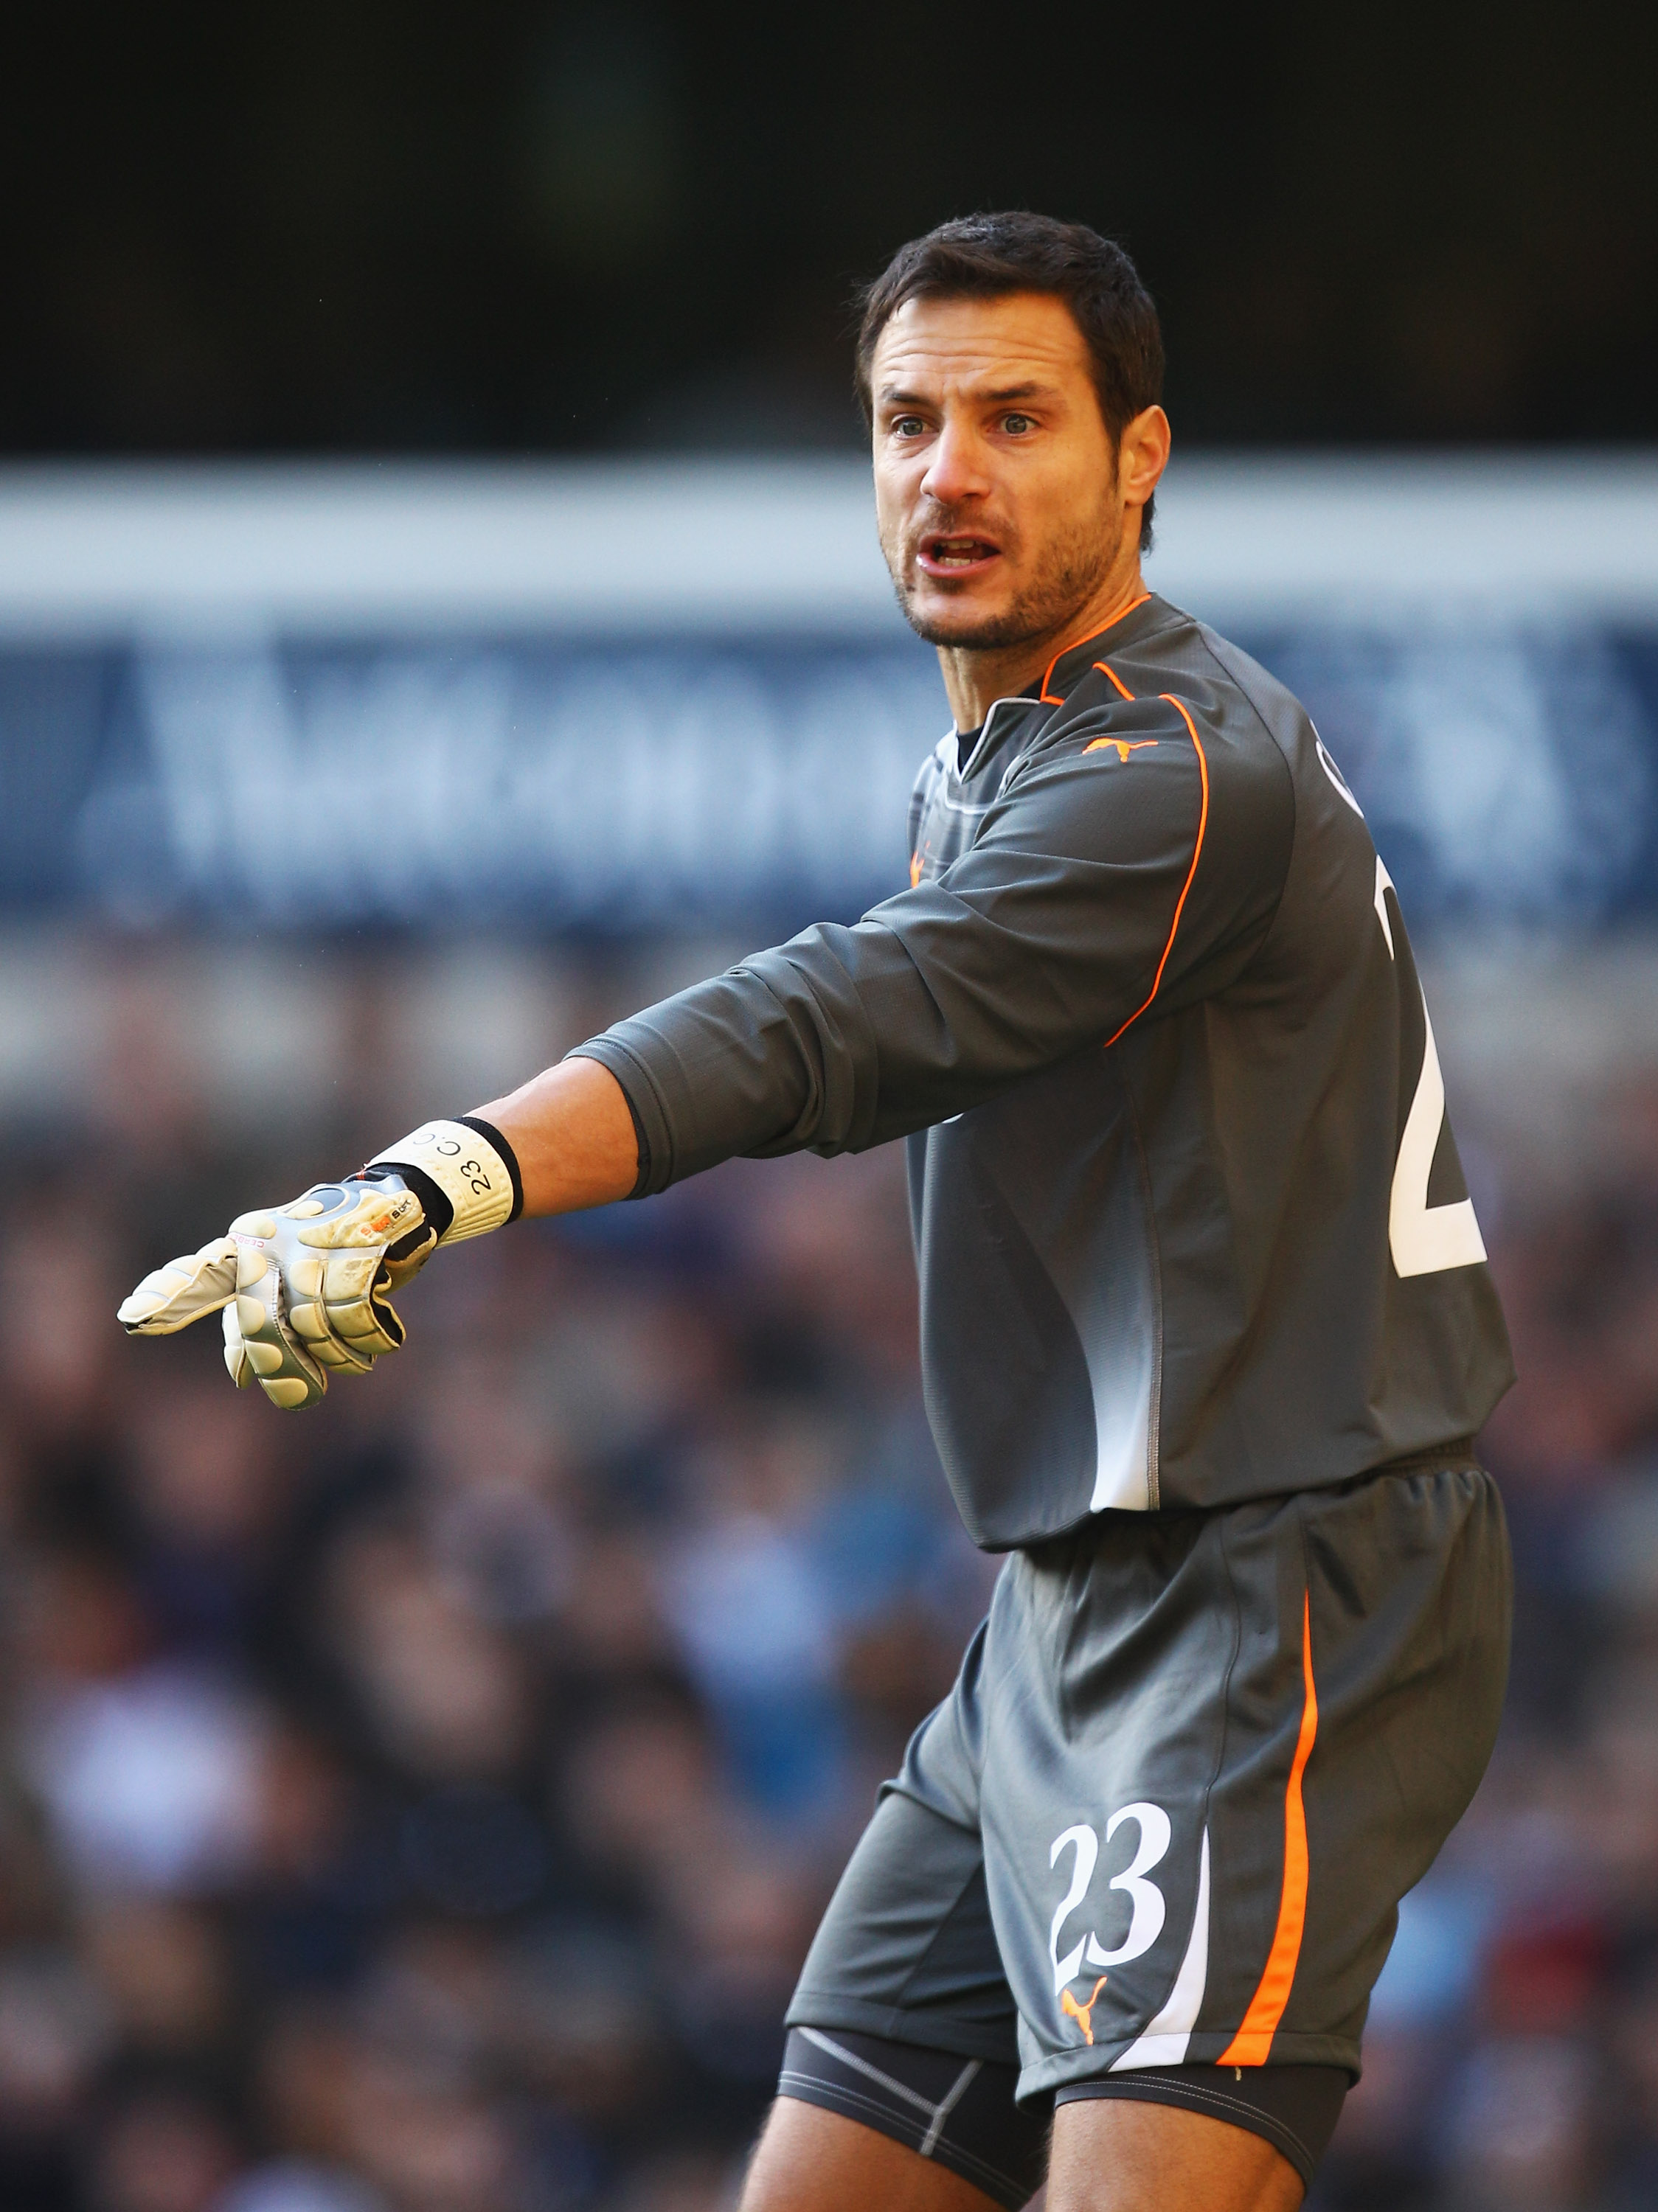 LONDON, ENGLAND - JANUARY 09: Goalkeeper Carlo Cudicini of Tottenham Hotspur gives instructions during the FA Cup sponsored by E.ON 3rd Round match between Tottenham Hotspur and Charlton Athletic at White Hart Lane on January 9, 2011 in London, England.